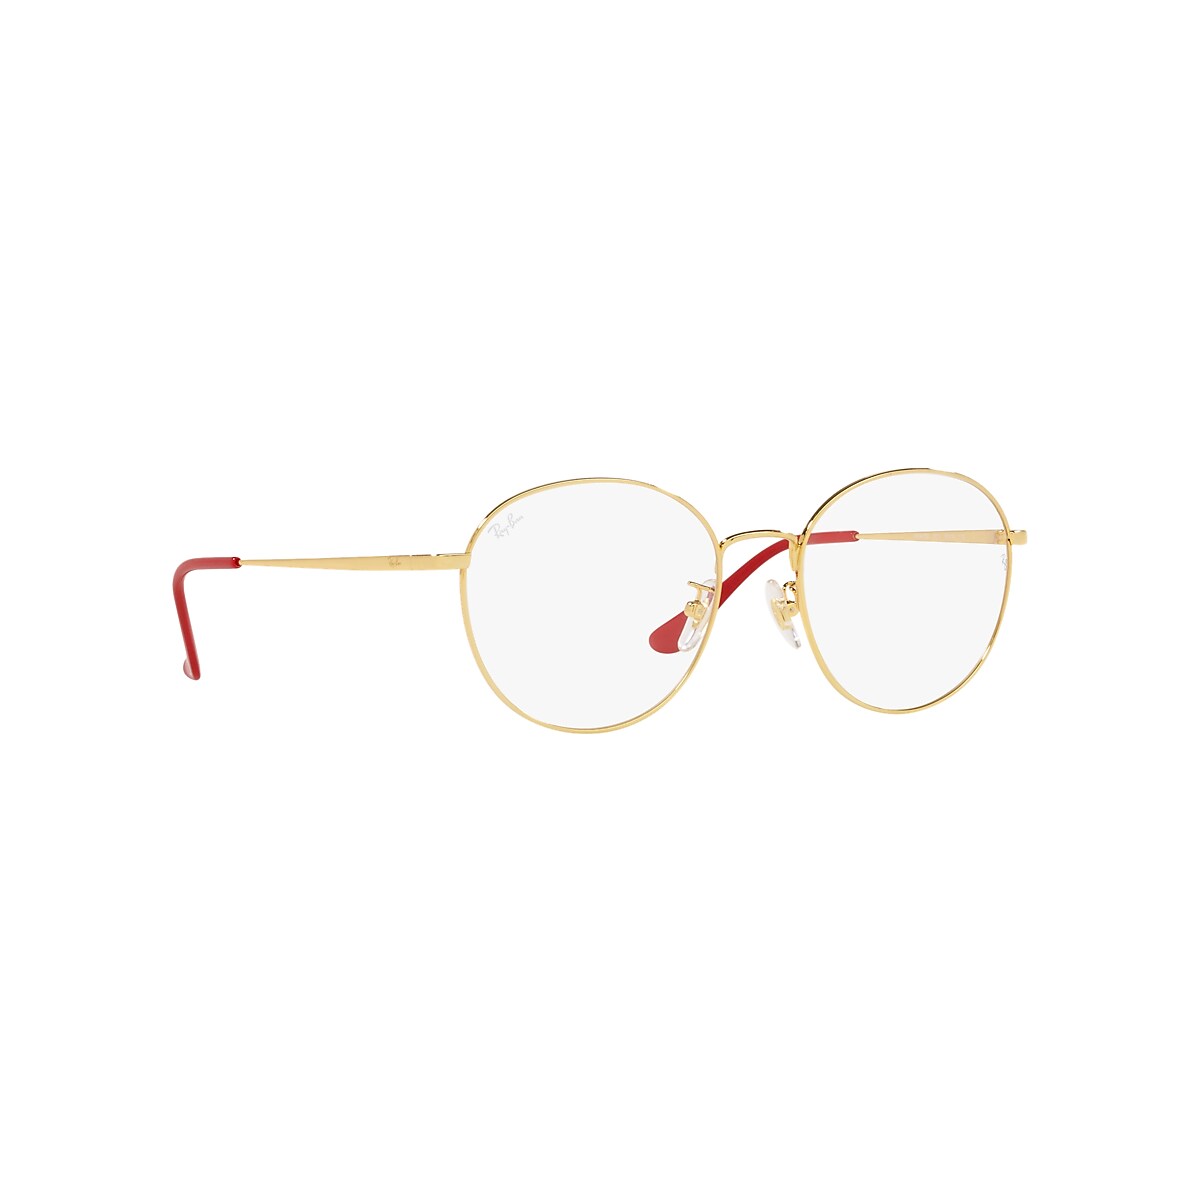 Rb6475d Cny Edition Eyeglasses with Gold Frame | Ray-Ban®